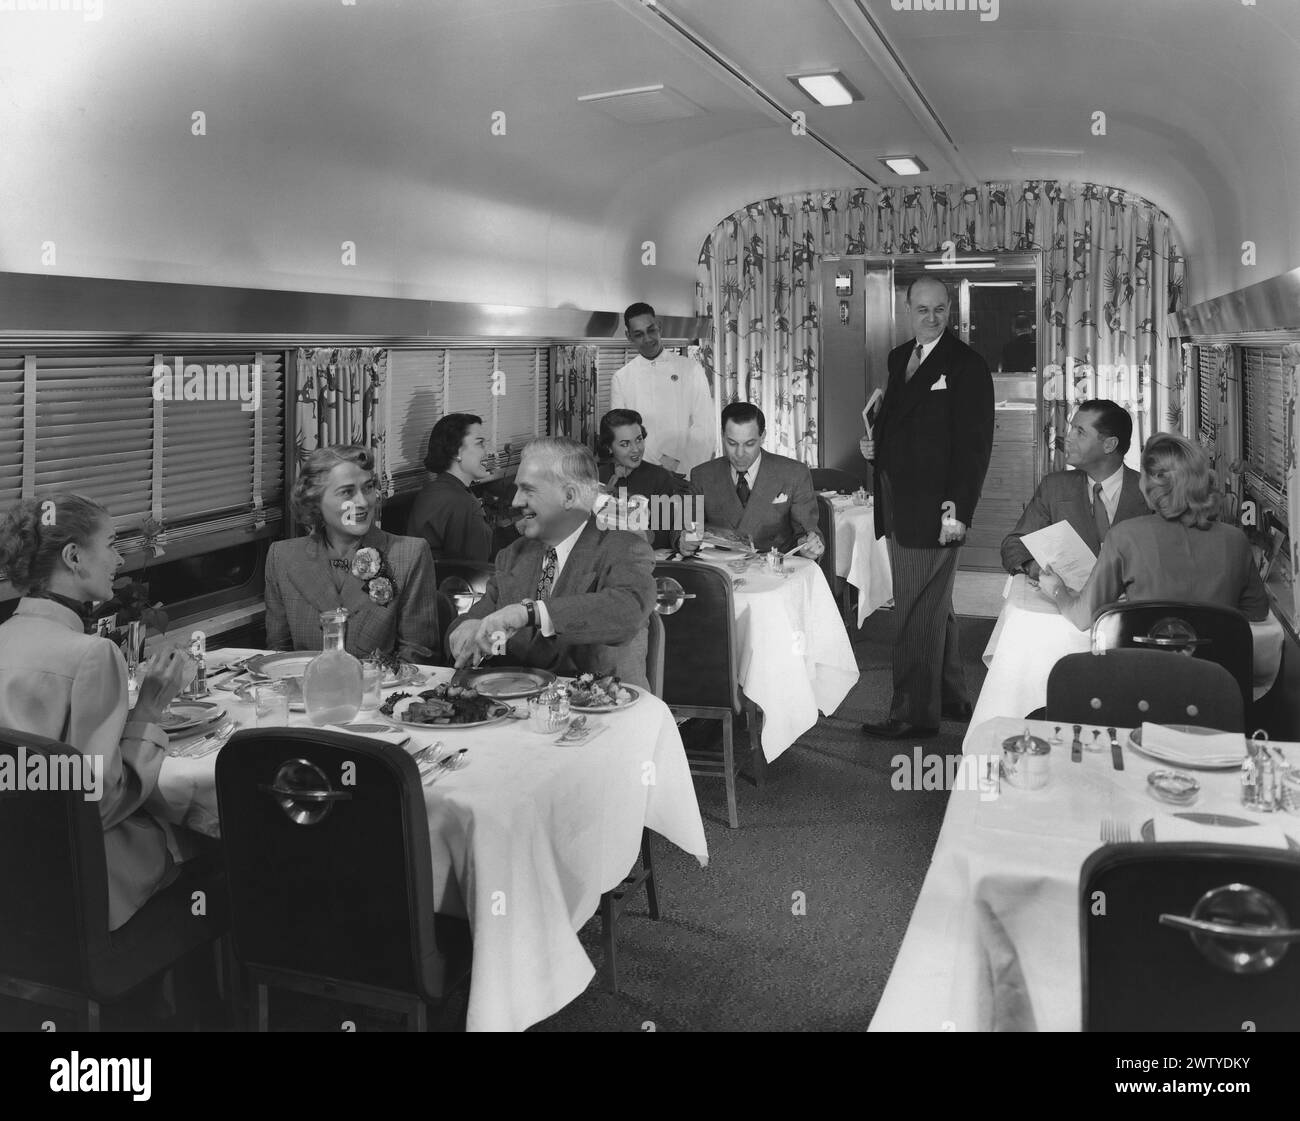 Well-dressed men and women sitting at white linen tablecloth covered tables with chinaware eating a meal in a railway car Stock Photo